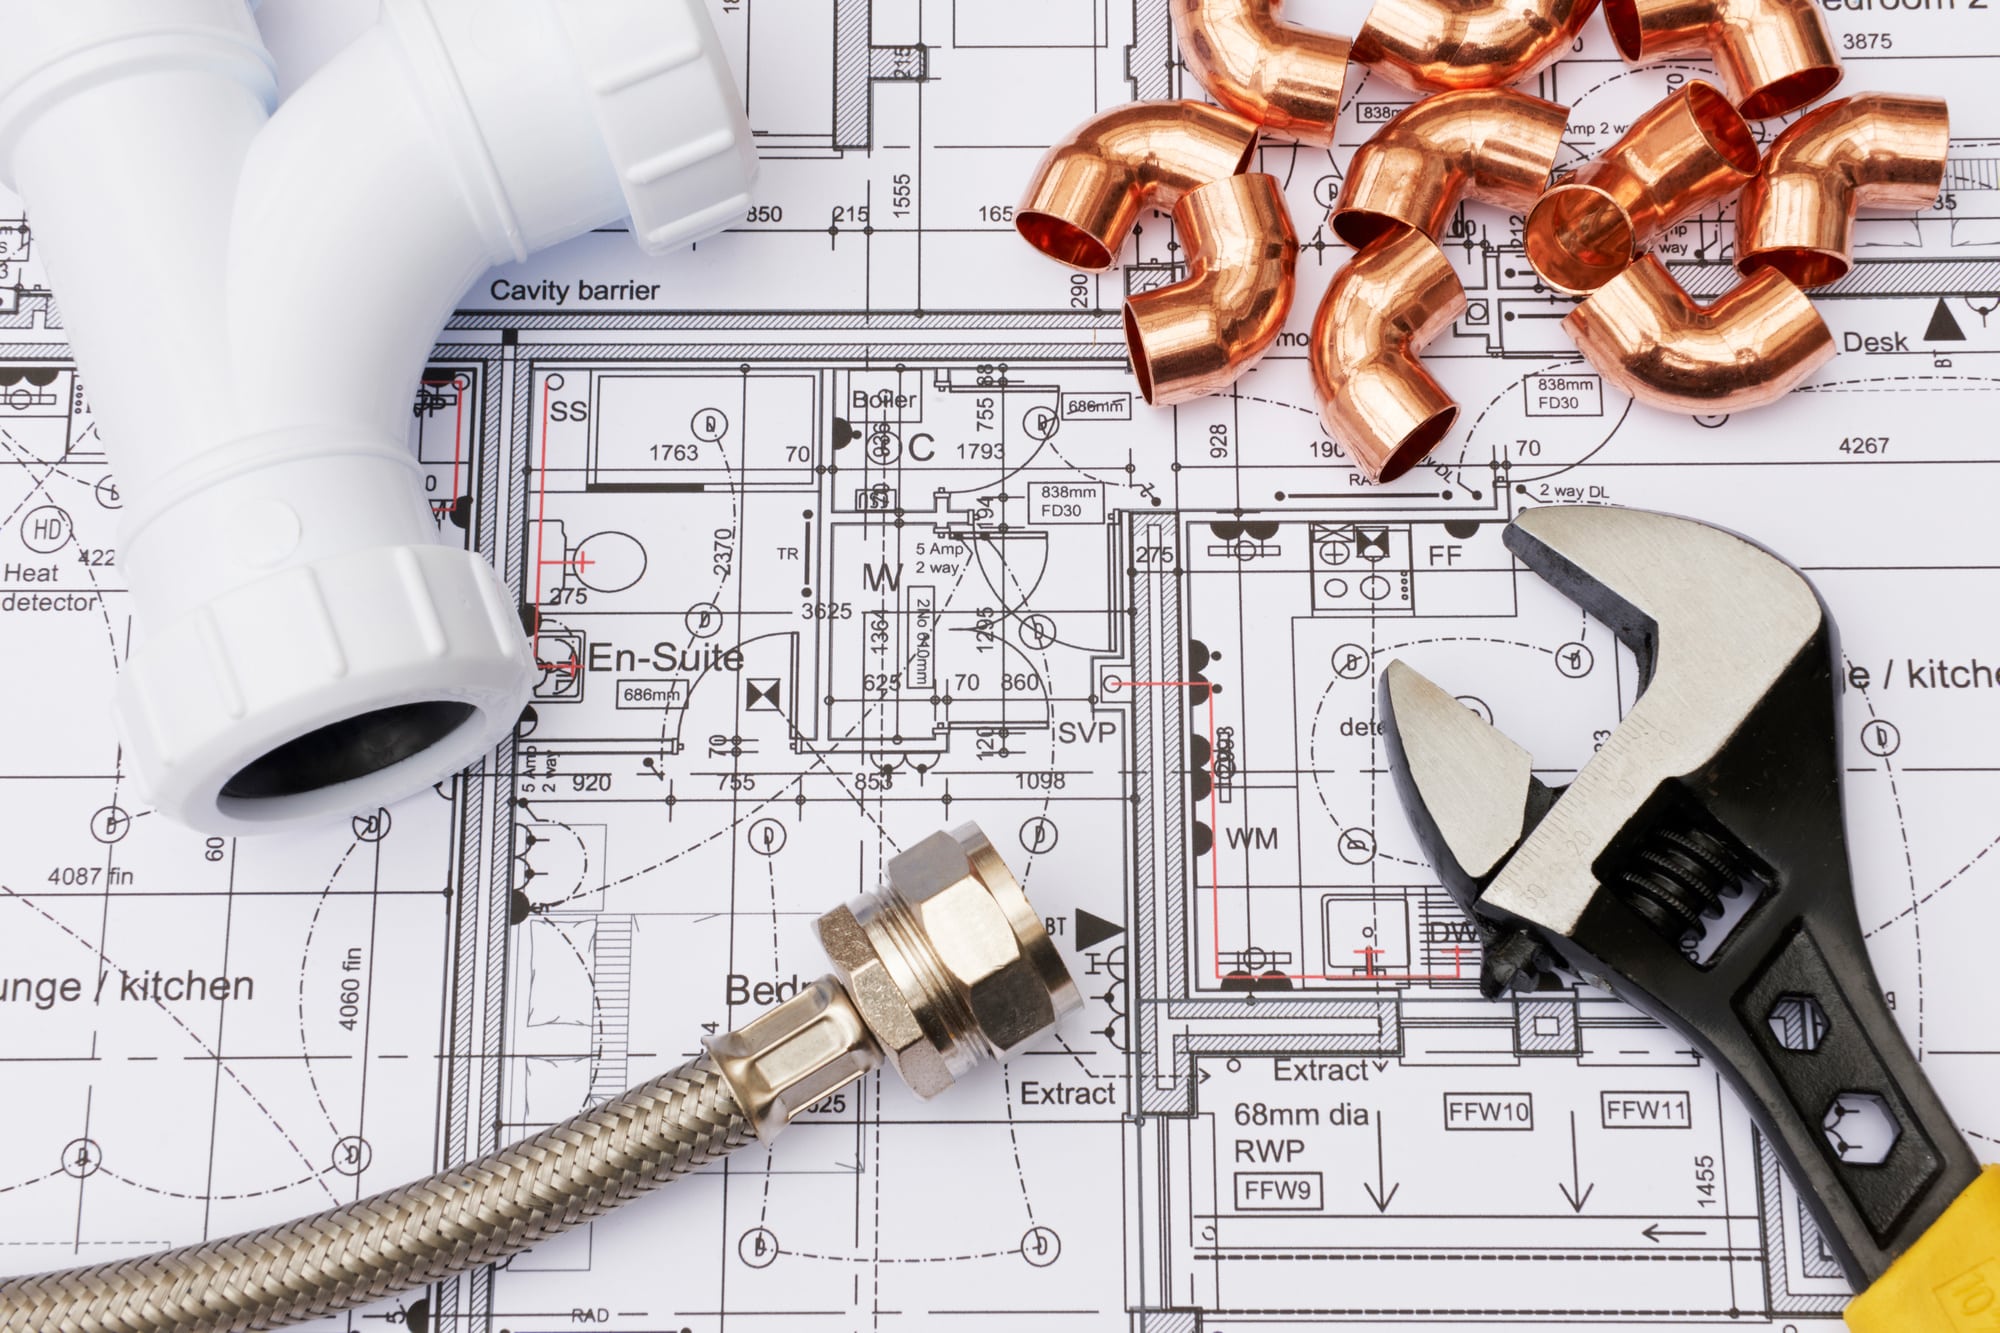 Repiping in Homes: What Is the Purpose?